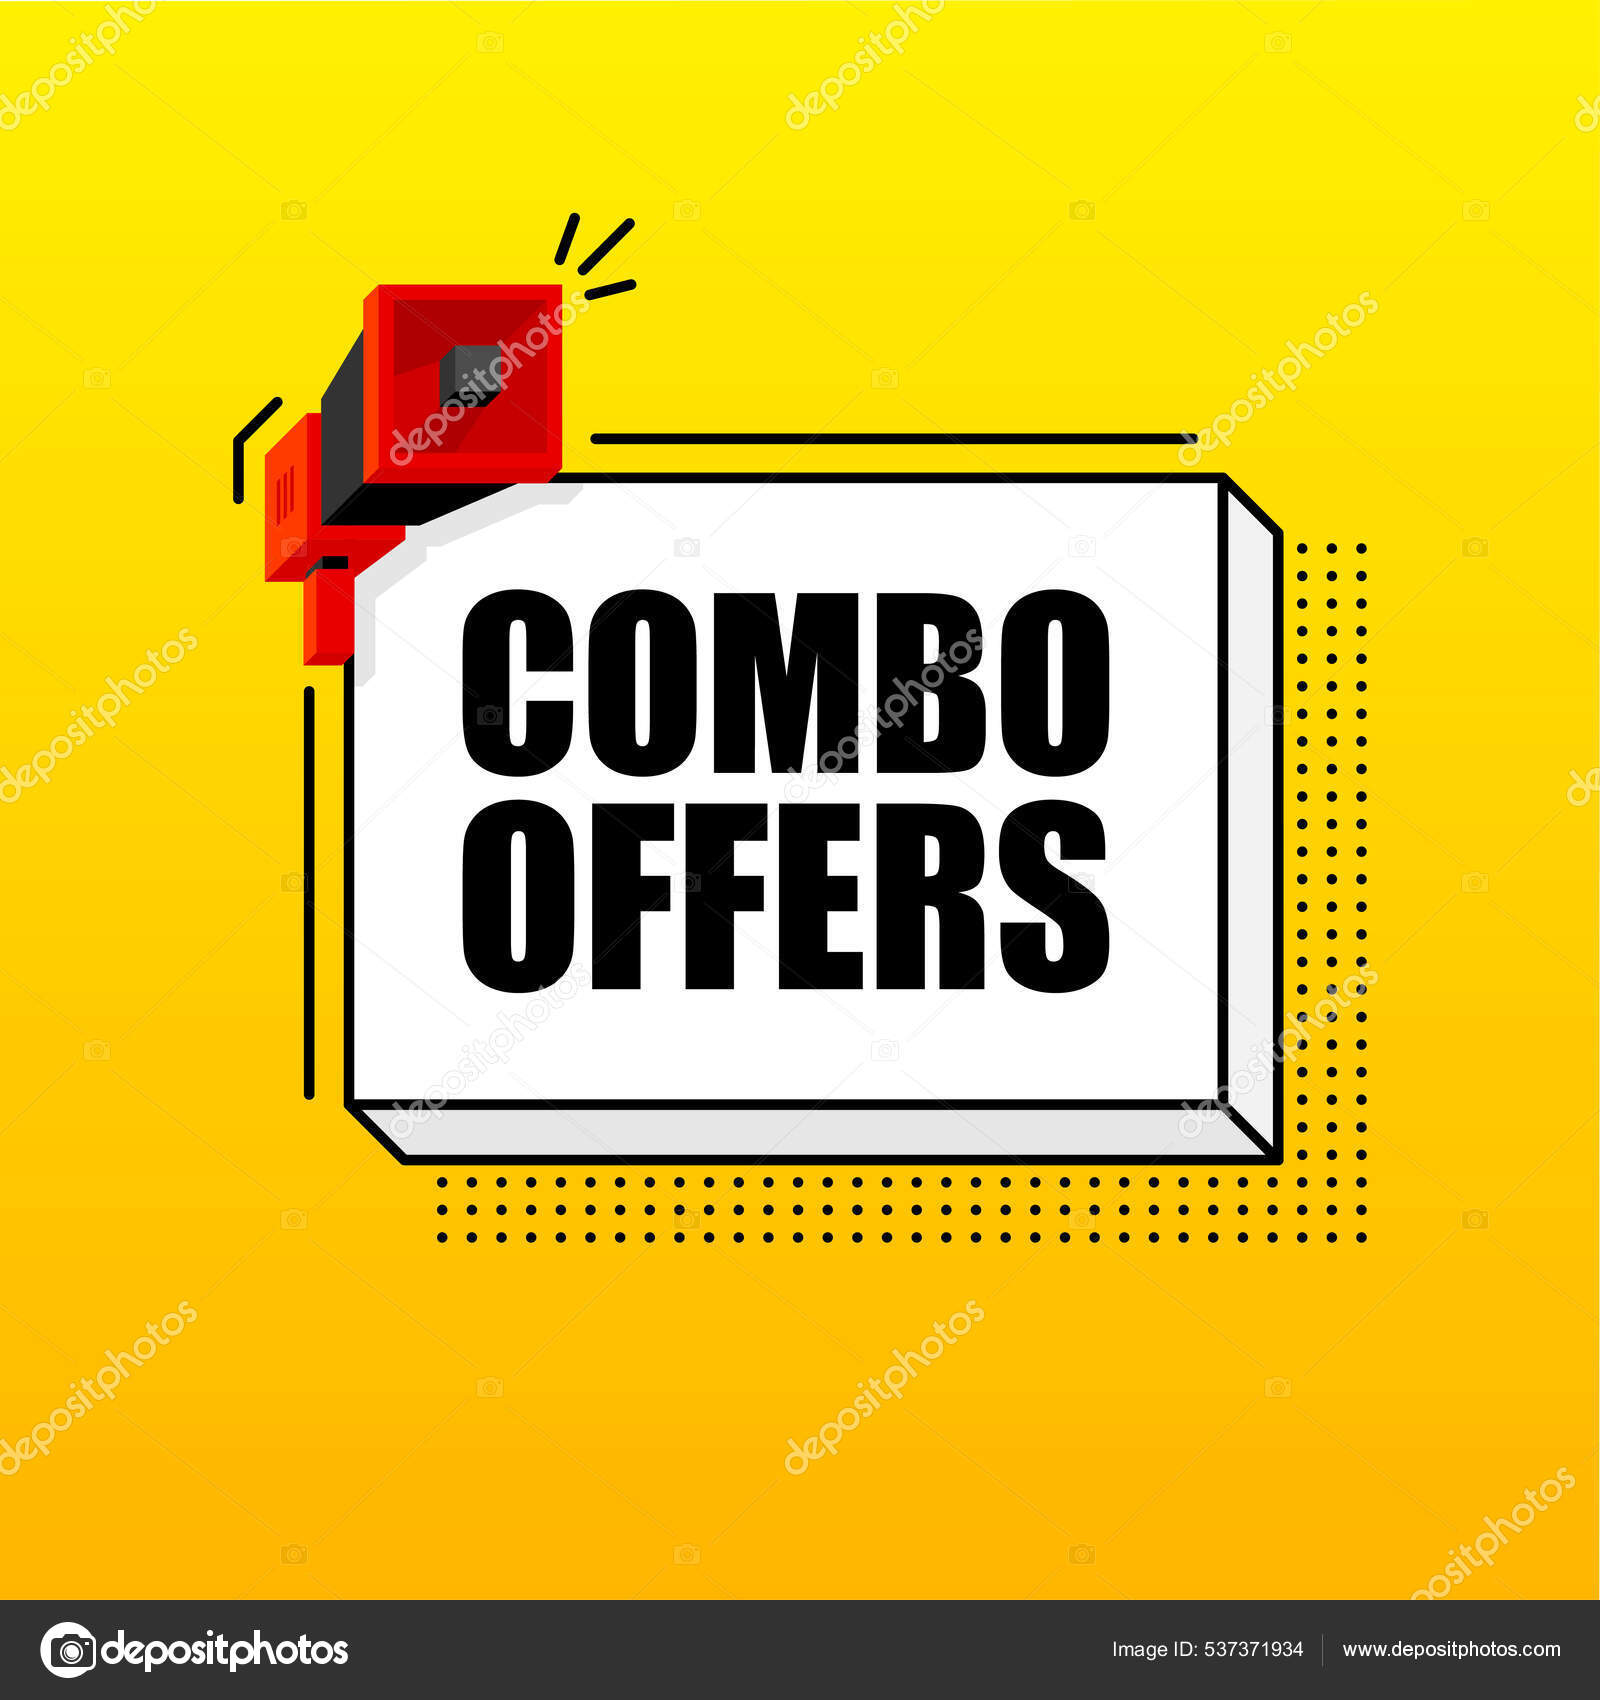 Combo Offers banner template. Marketing flyer with megaphone